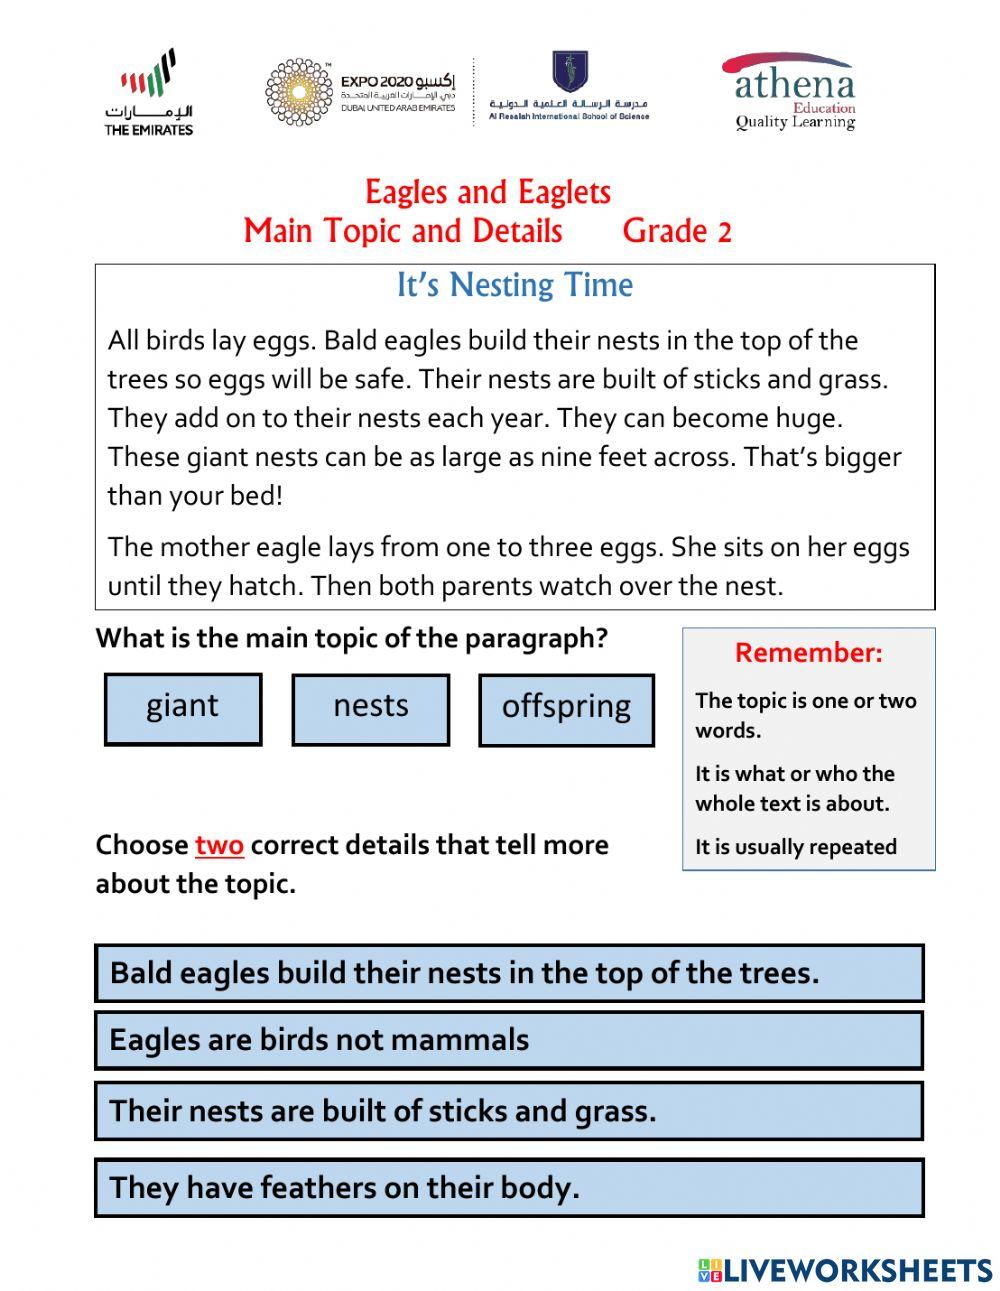 Eagles and Eaglets - Main Topic and Details